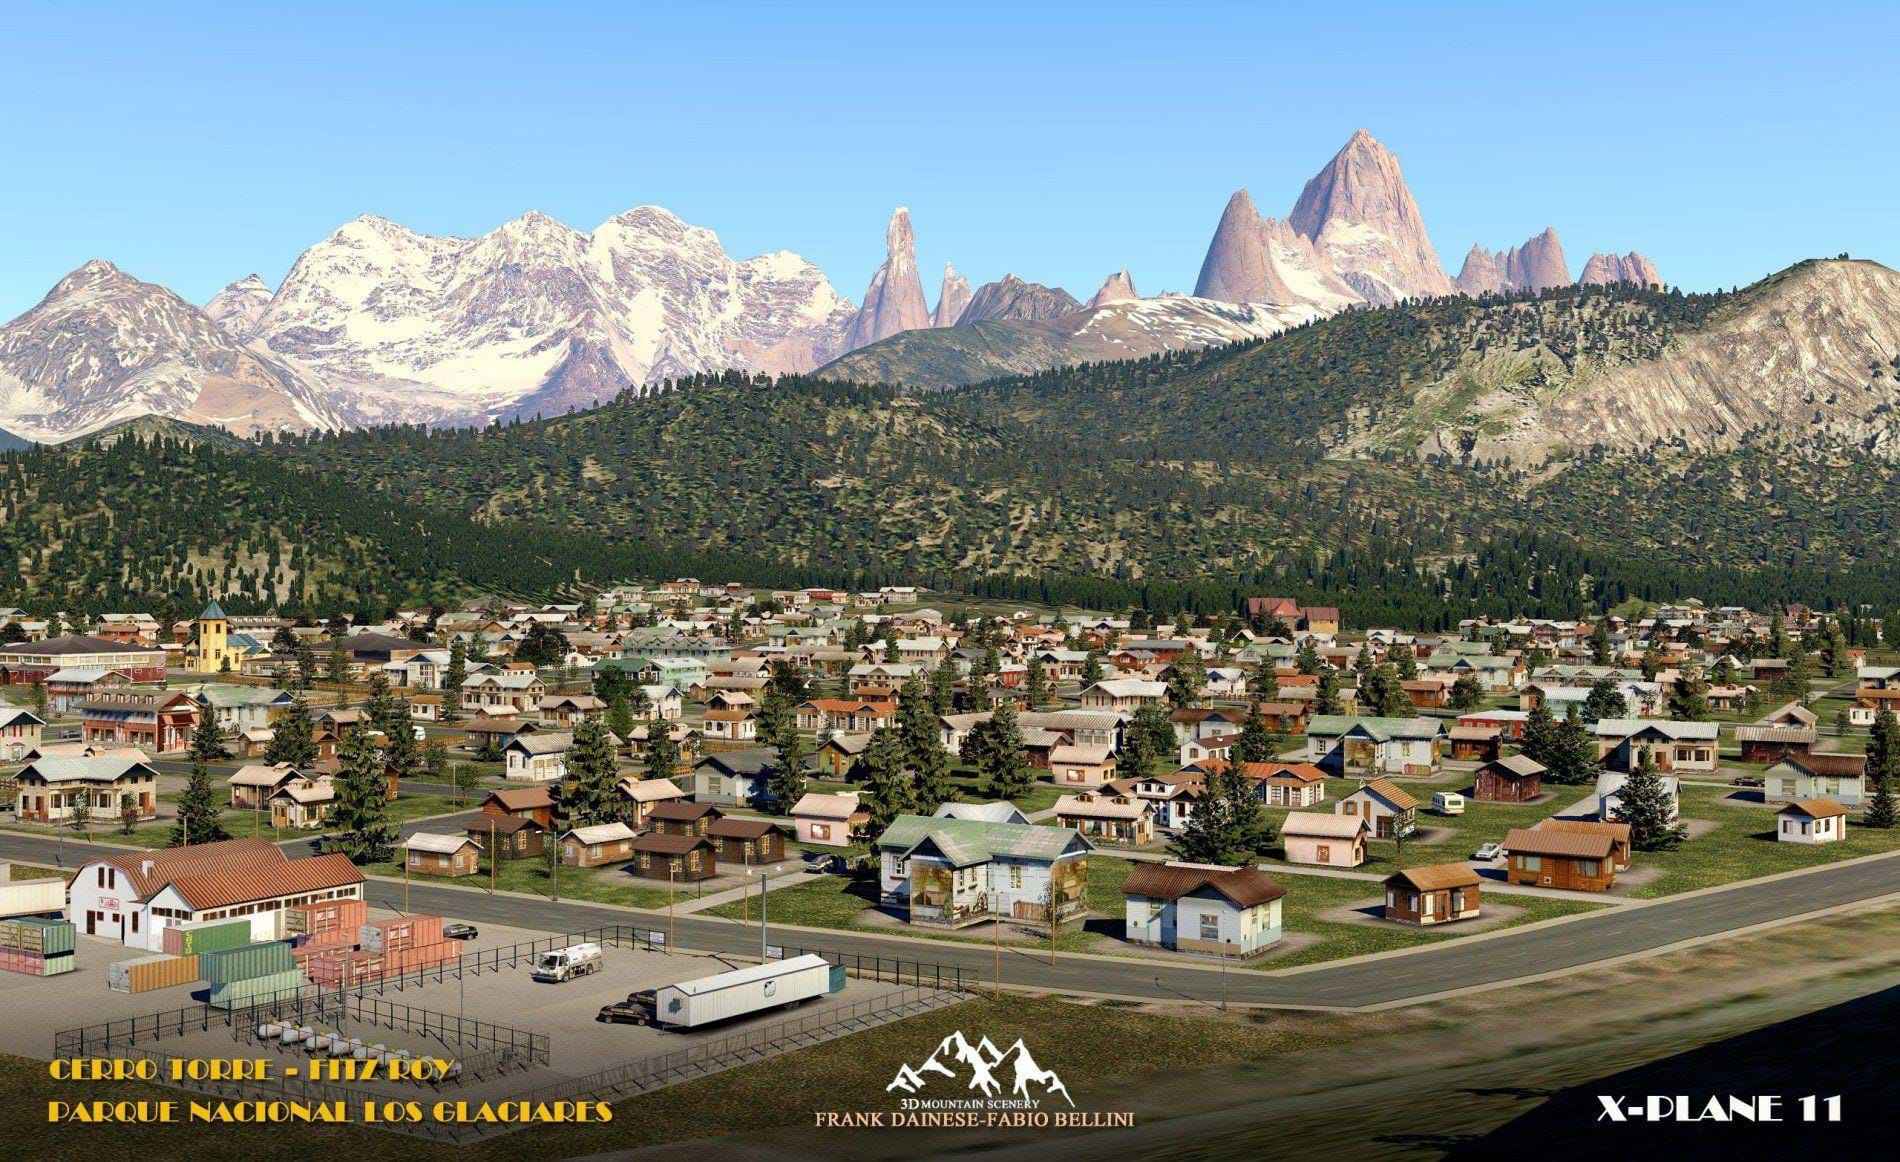 Frank Dainese and Fabio Bellini announce Cerro Torre and Fitz Roy for X-Plane